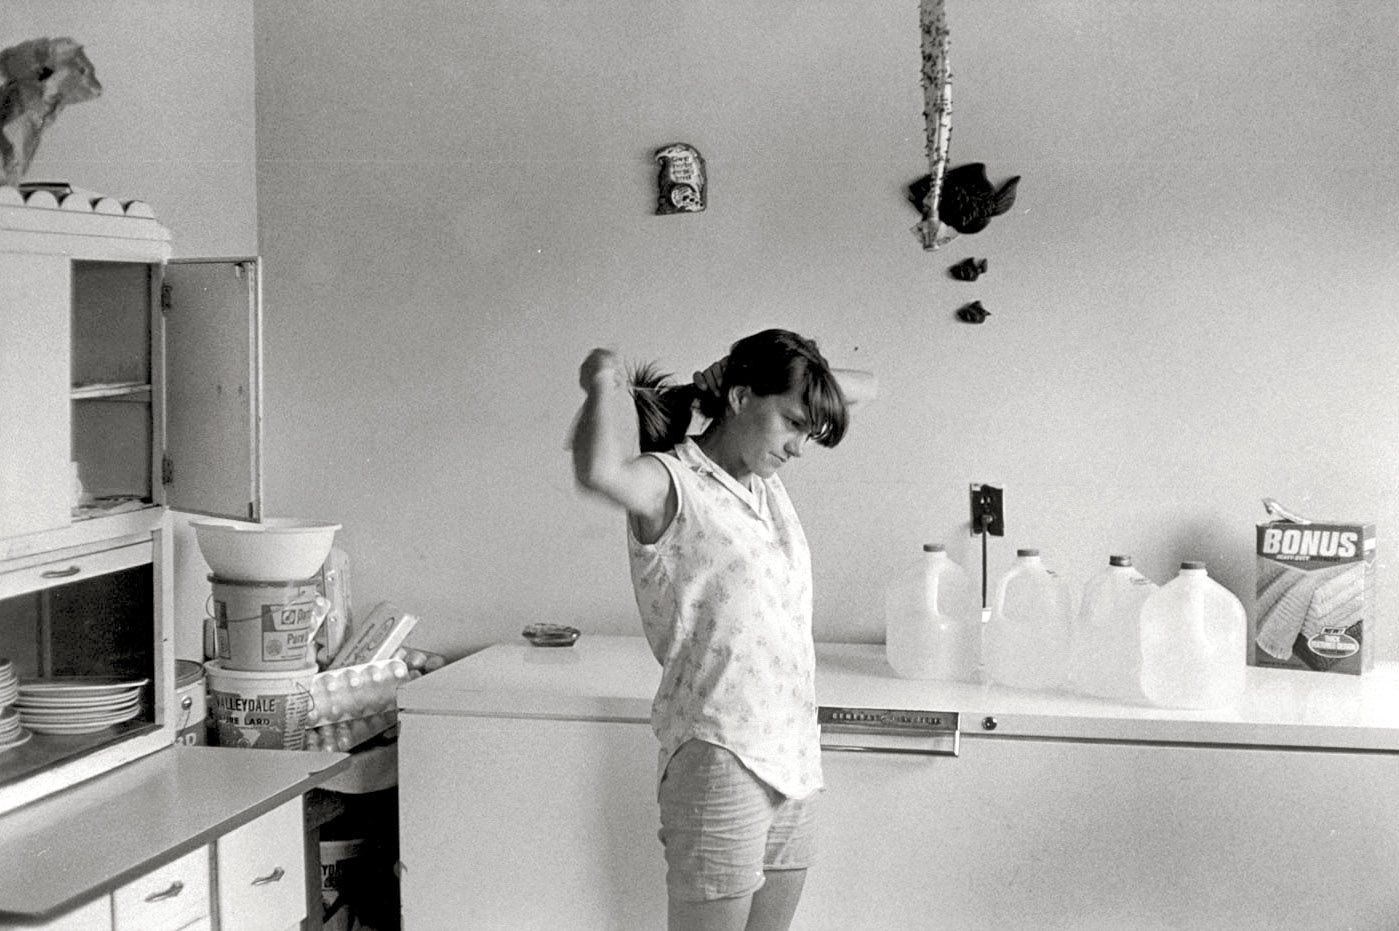 "Woman in kitchen tying her hair." Another of William Gedney's images from 1972 of the Cornett family in Leatherwood, Kentucky. [Link 1] [Link 2]. William Gedney Photographs and Writings Collection, Duke University. View full size.